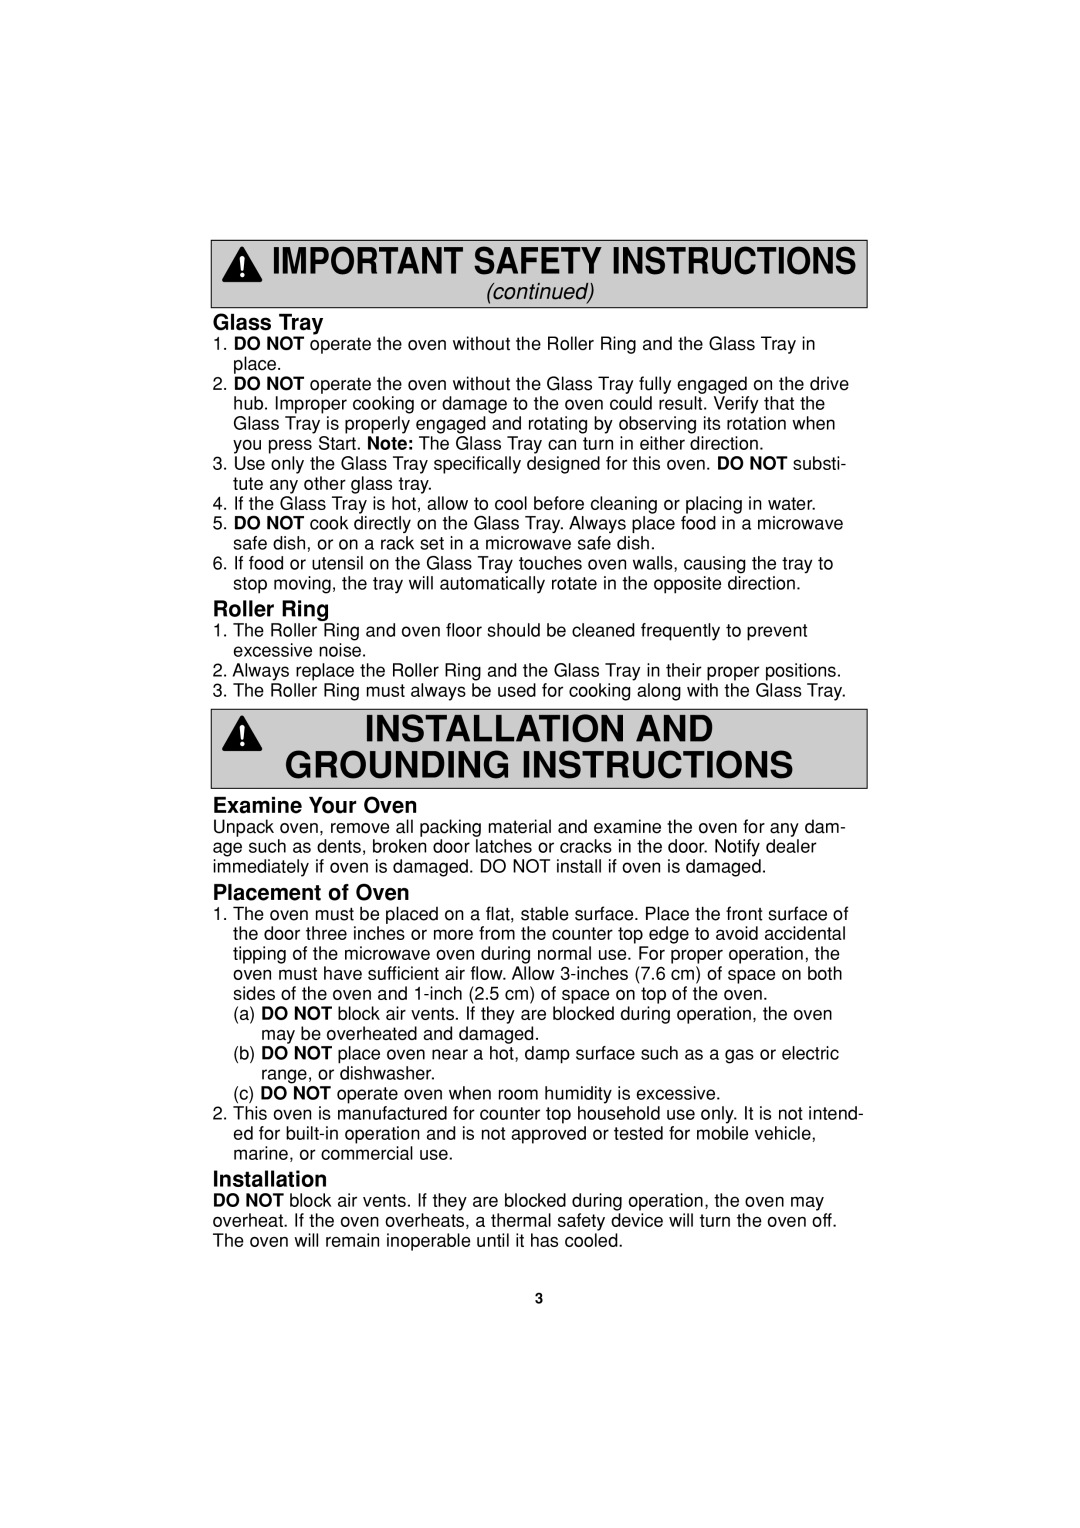 Panasonic NN-S334 Installation And Grounding Instructions, Glass Tray, Roller Ring, Examine Your Oven, Placement of Oven 